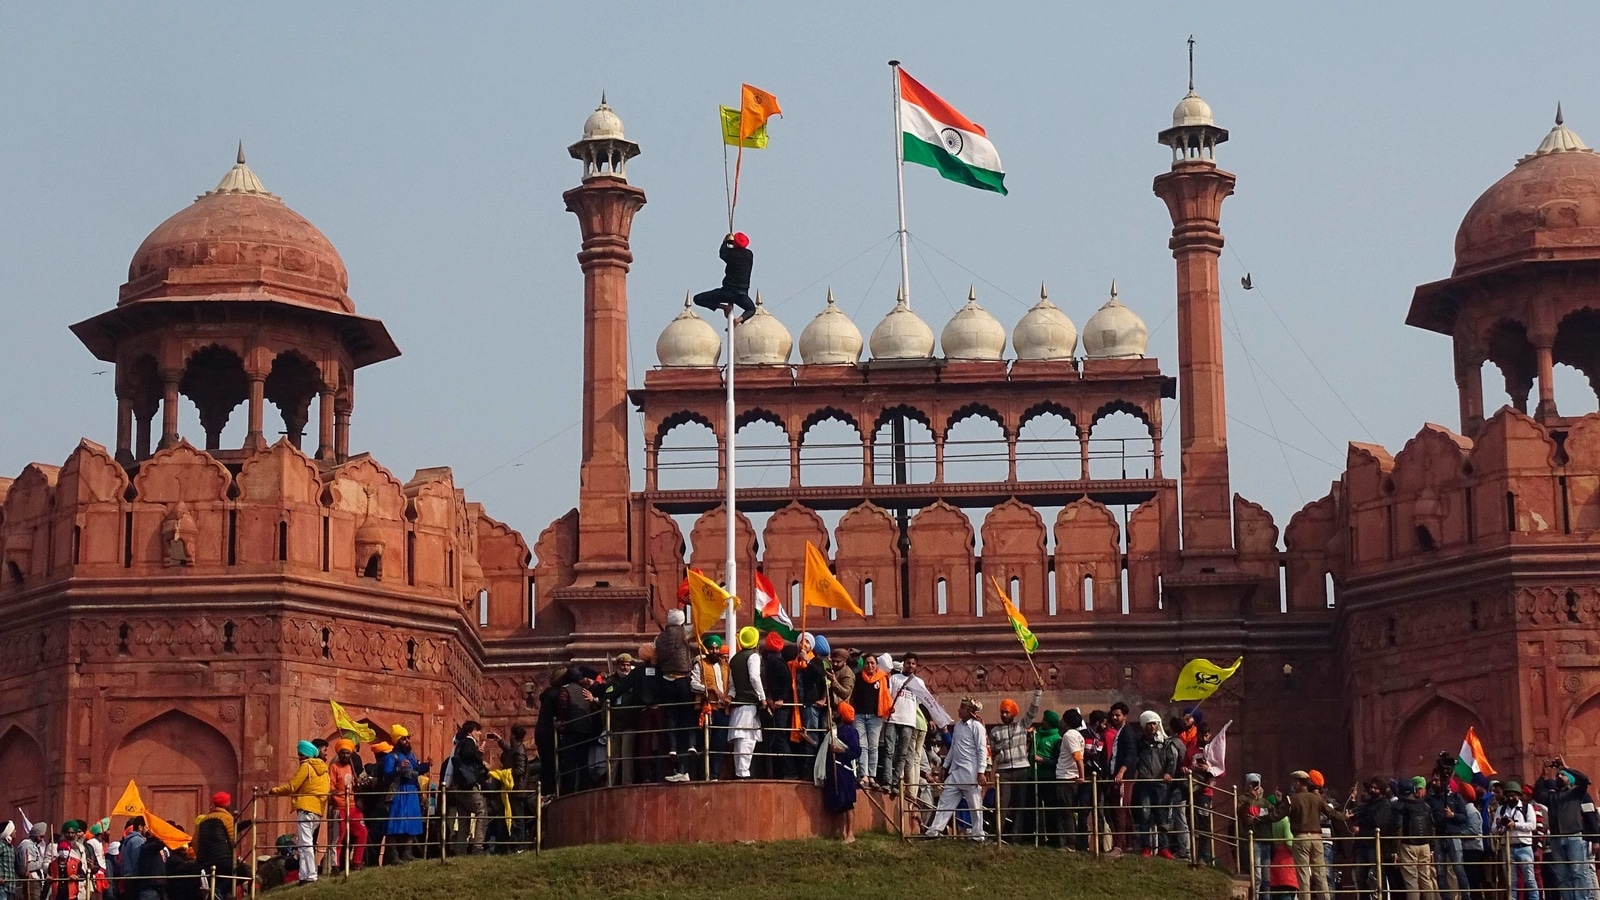 Red Fort saw 'irreplaceable' damage, historic brass urns missing ...